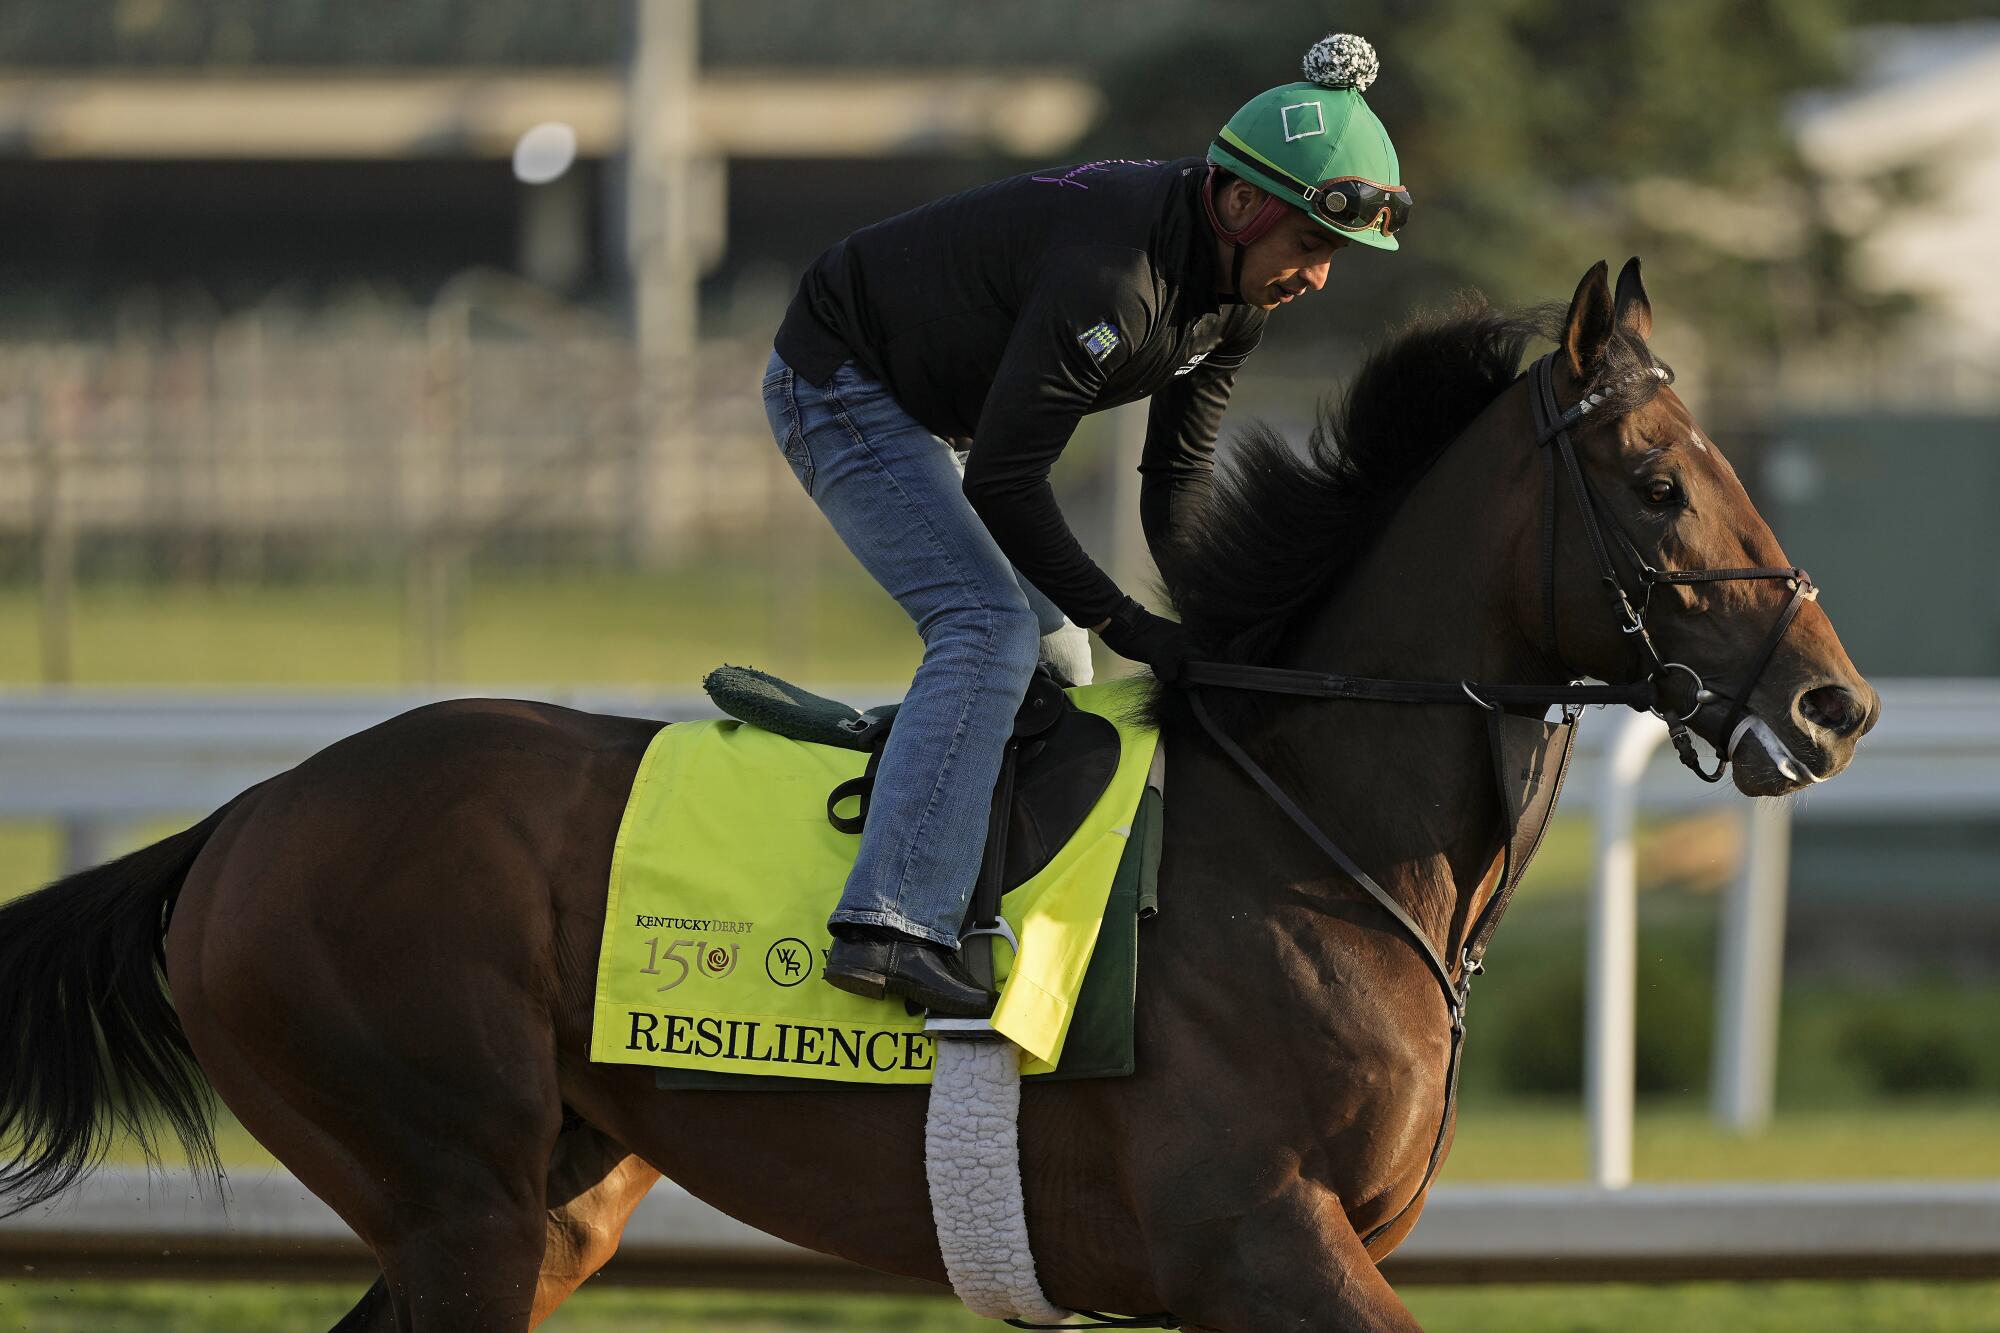 A jockey rides Kentucky Derby hopeful Resilience during a workout at Churchill Downs.